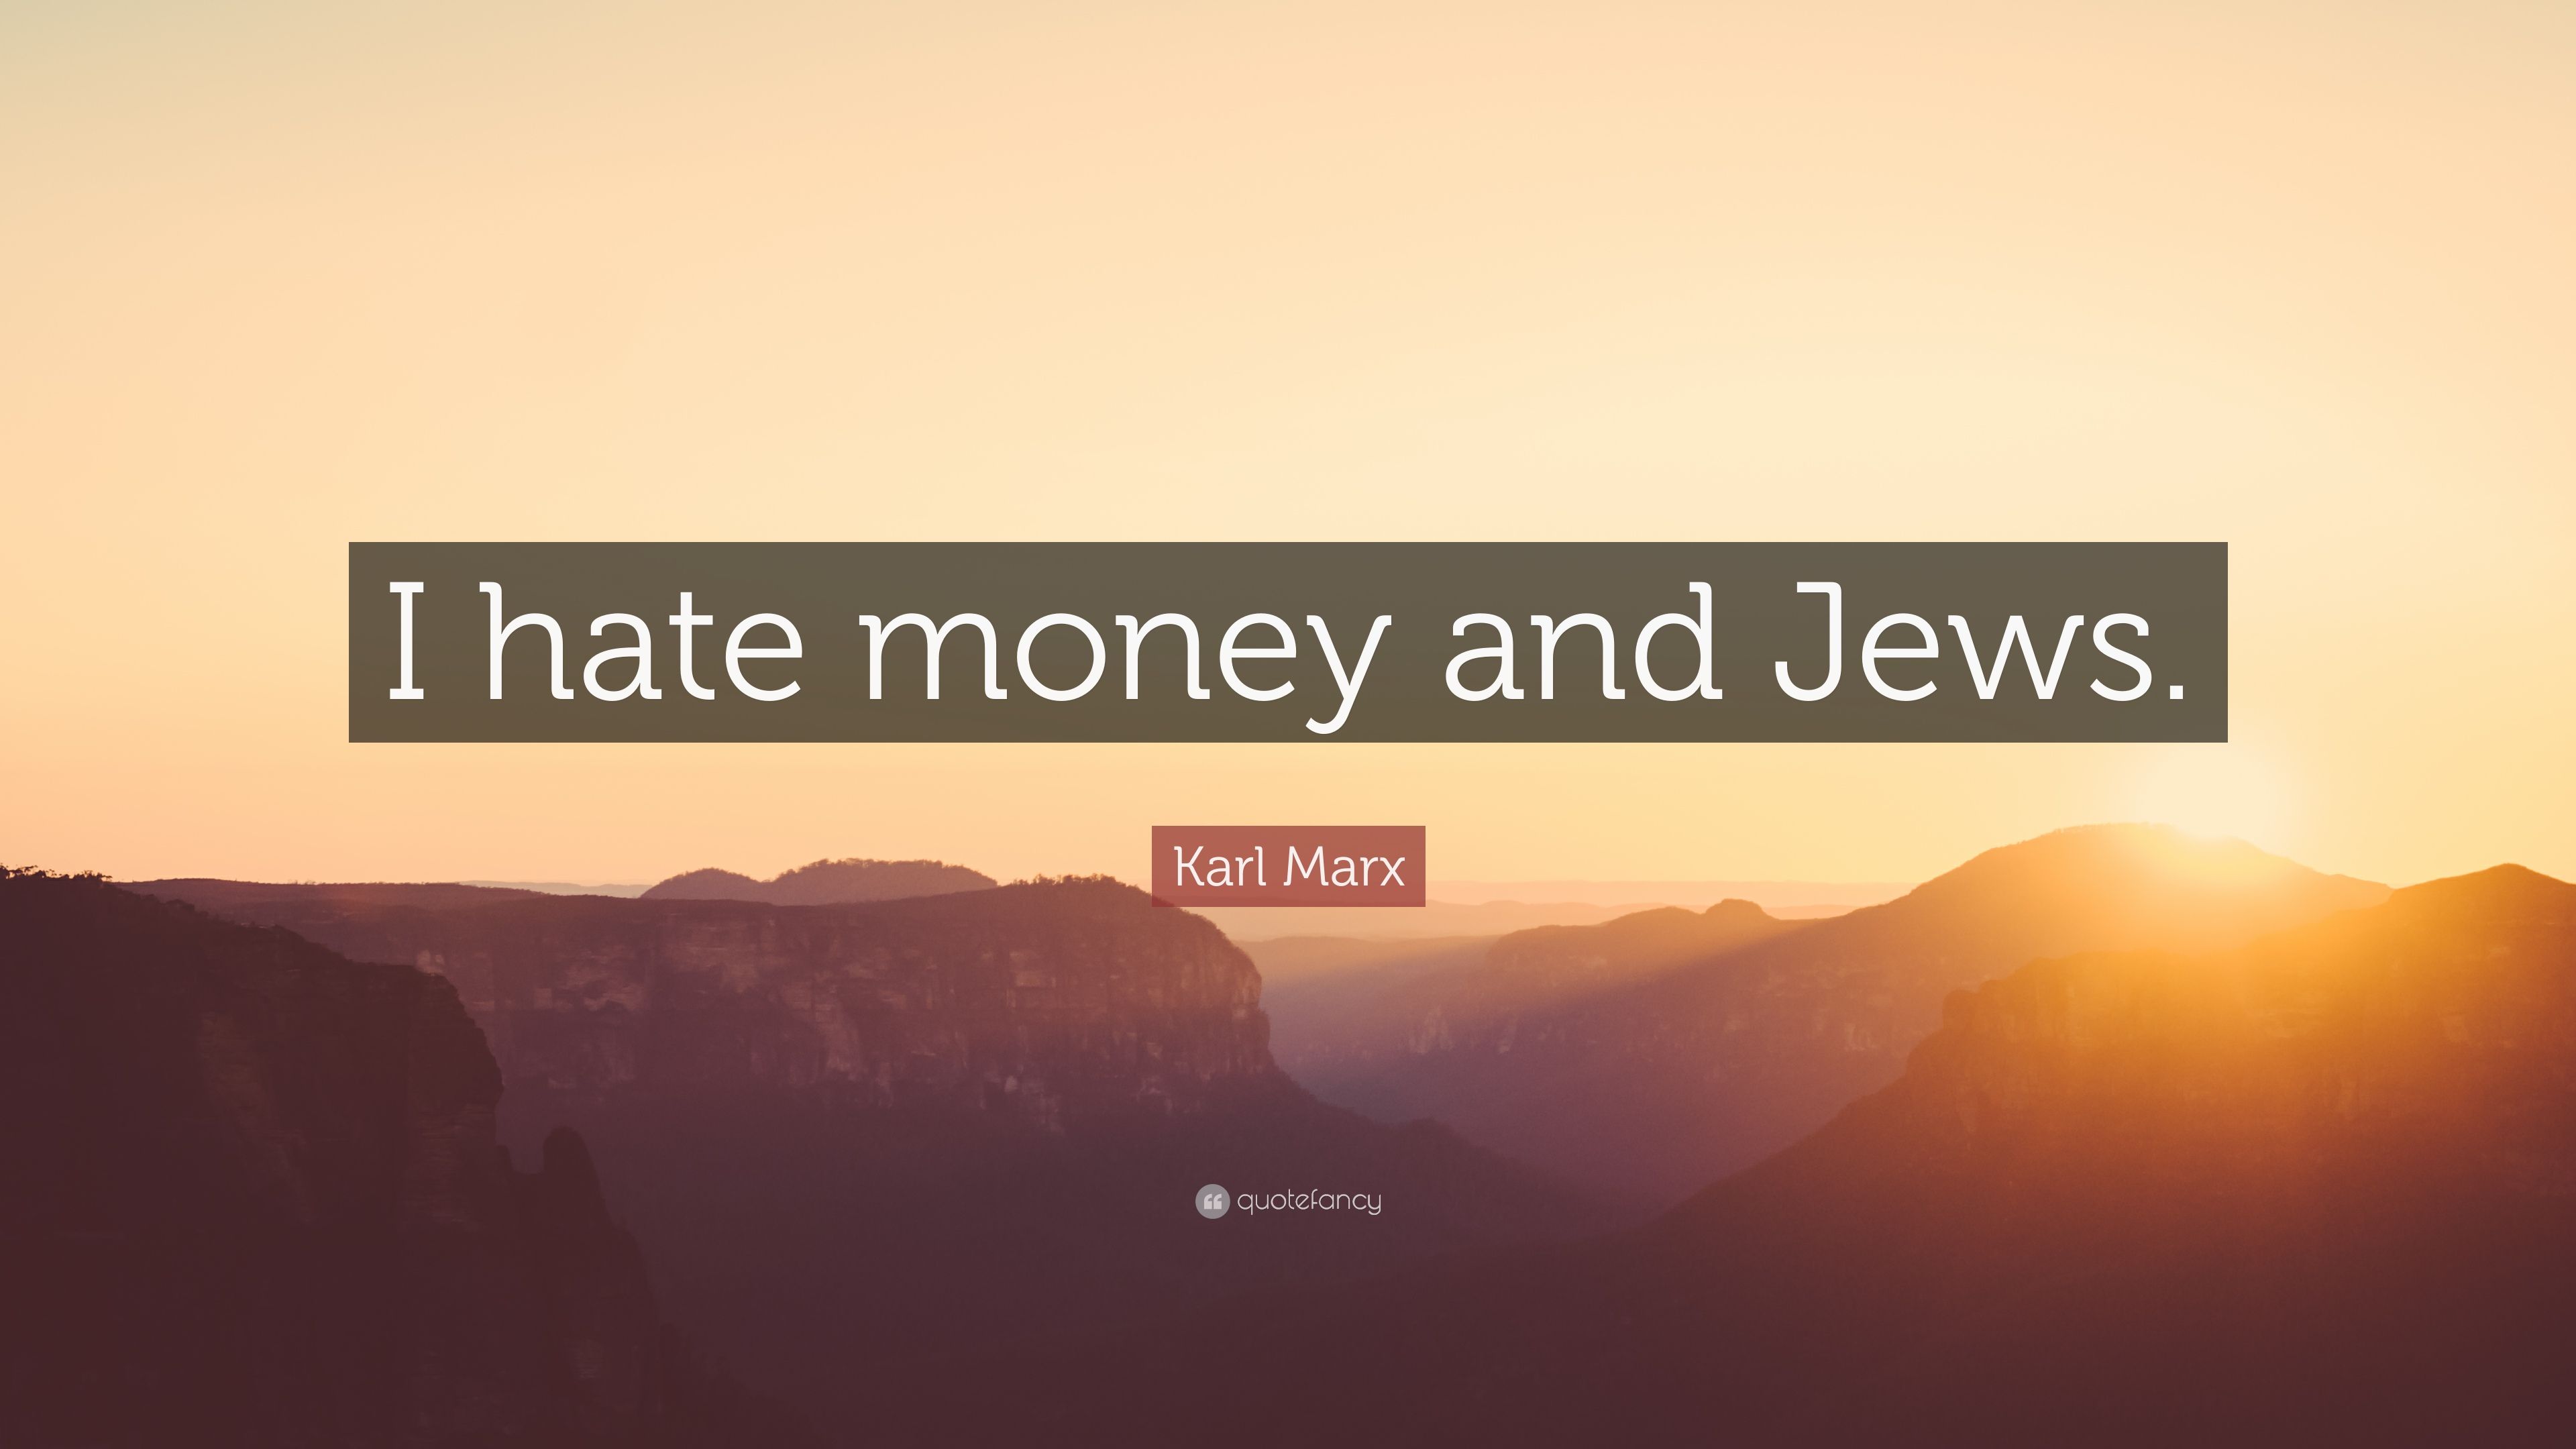 Karl Marx Quote: “I hate money and Jews.” (12 wallpaper)